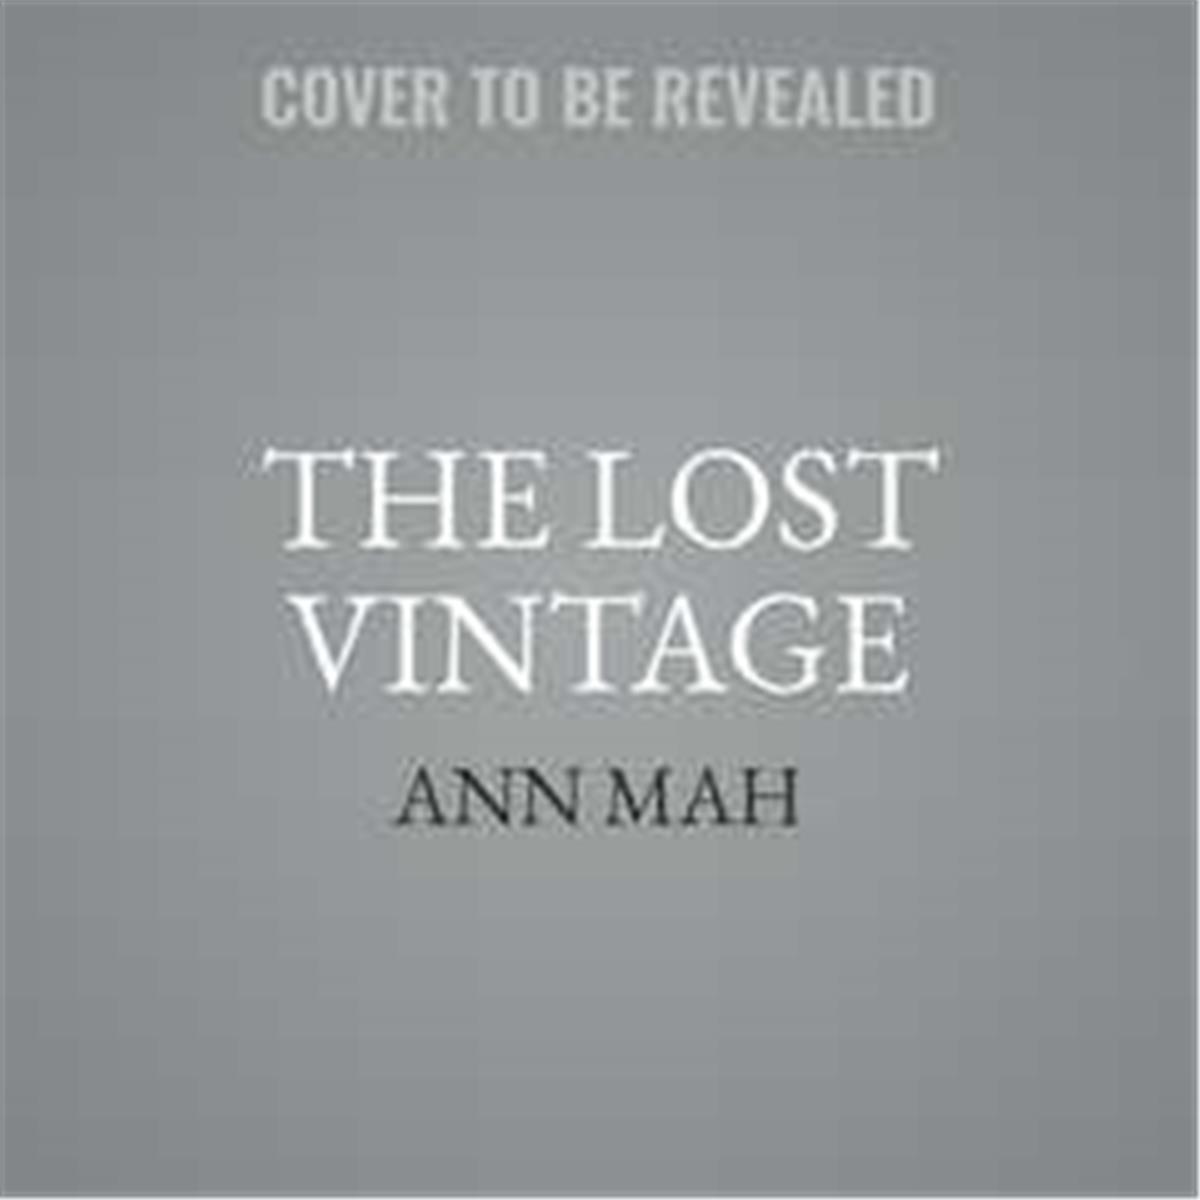 ISBN 9781538550281 product image for 9781538550281 The Lost Vintage Audio Book | upcitemdb.com